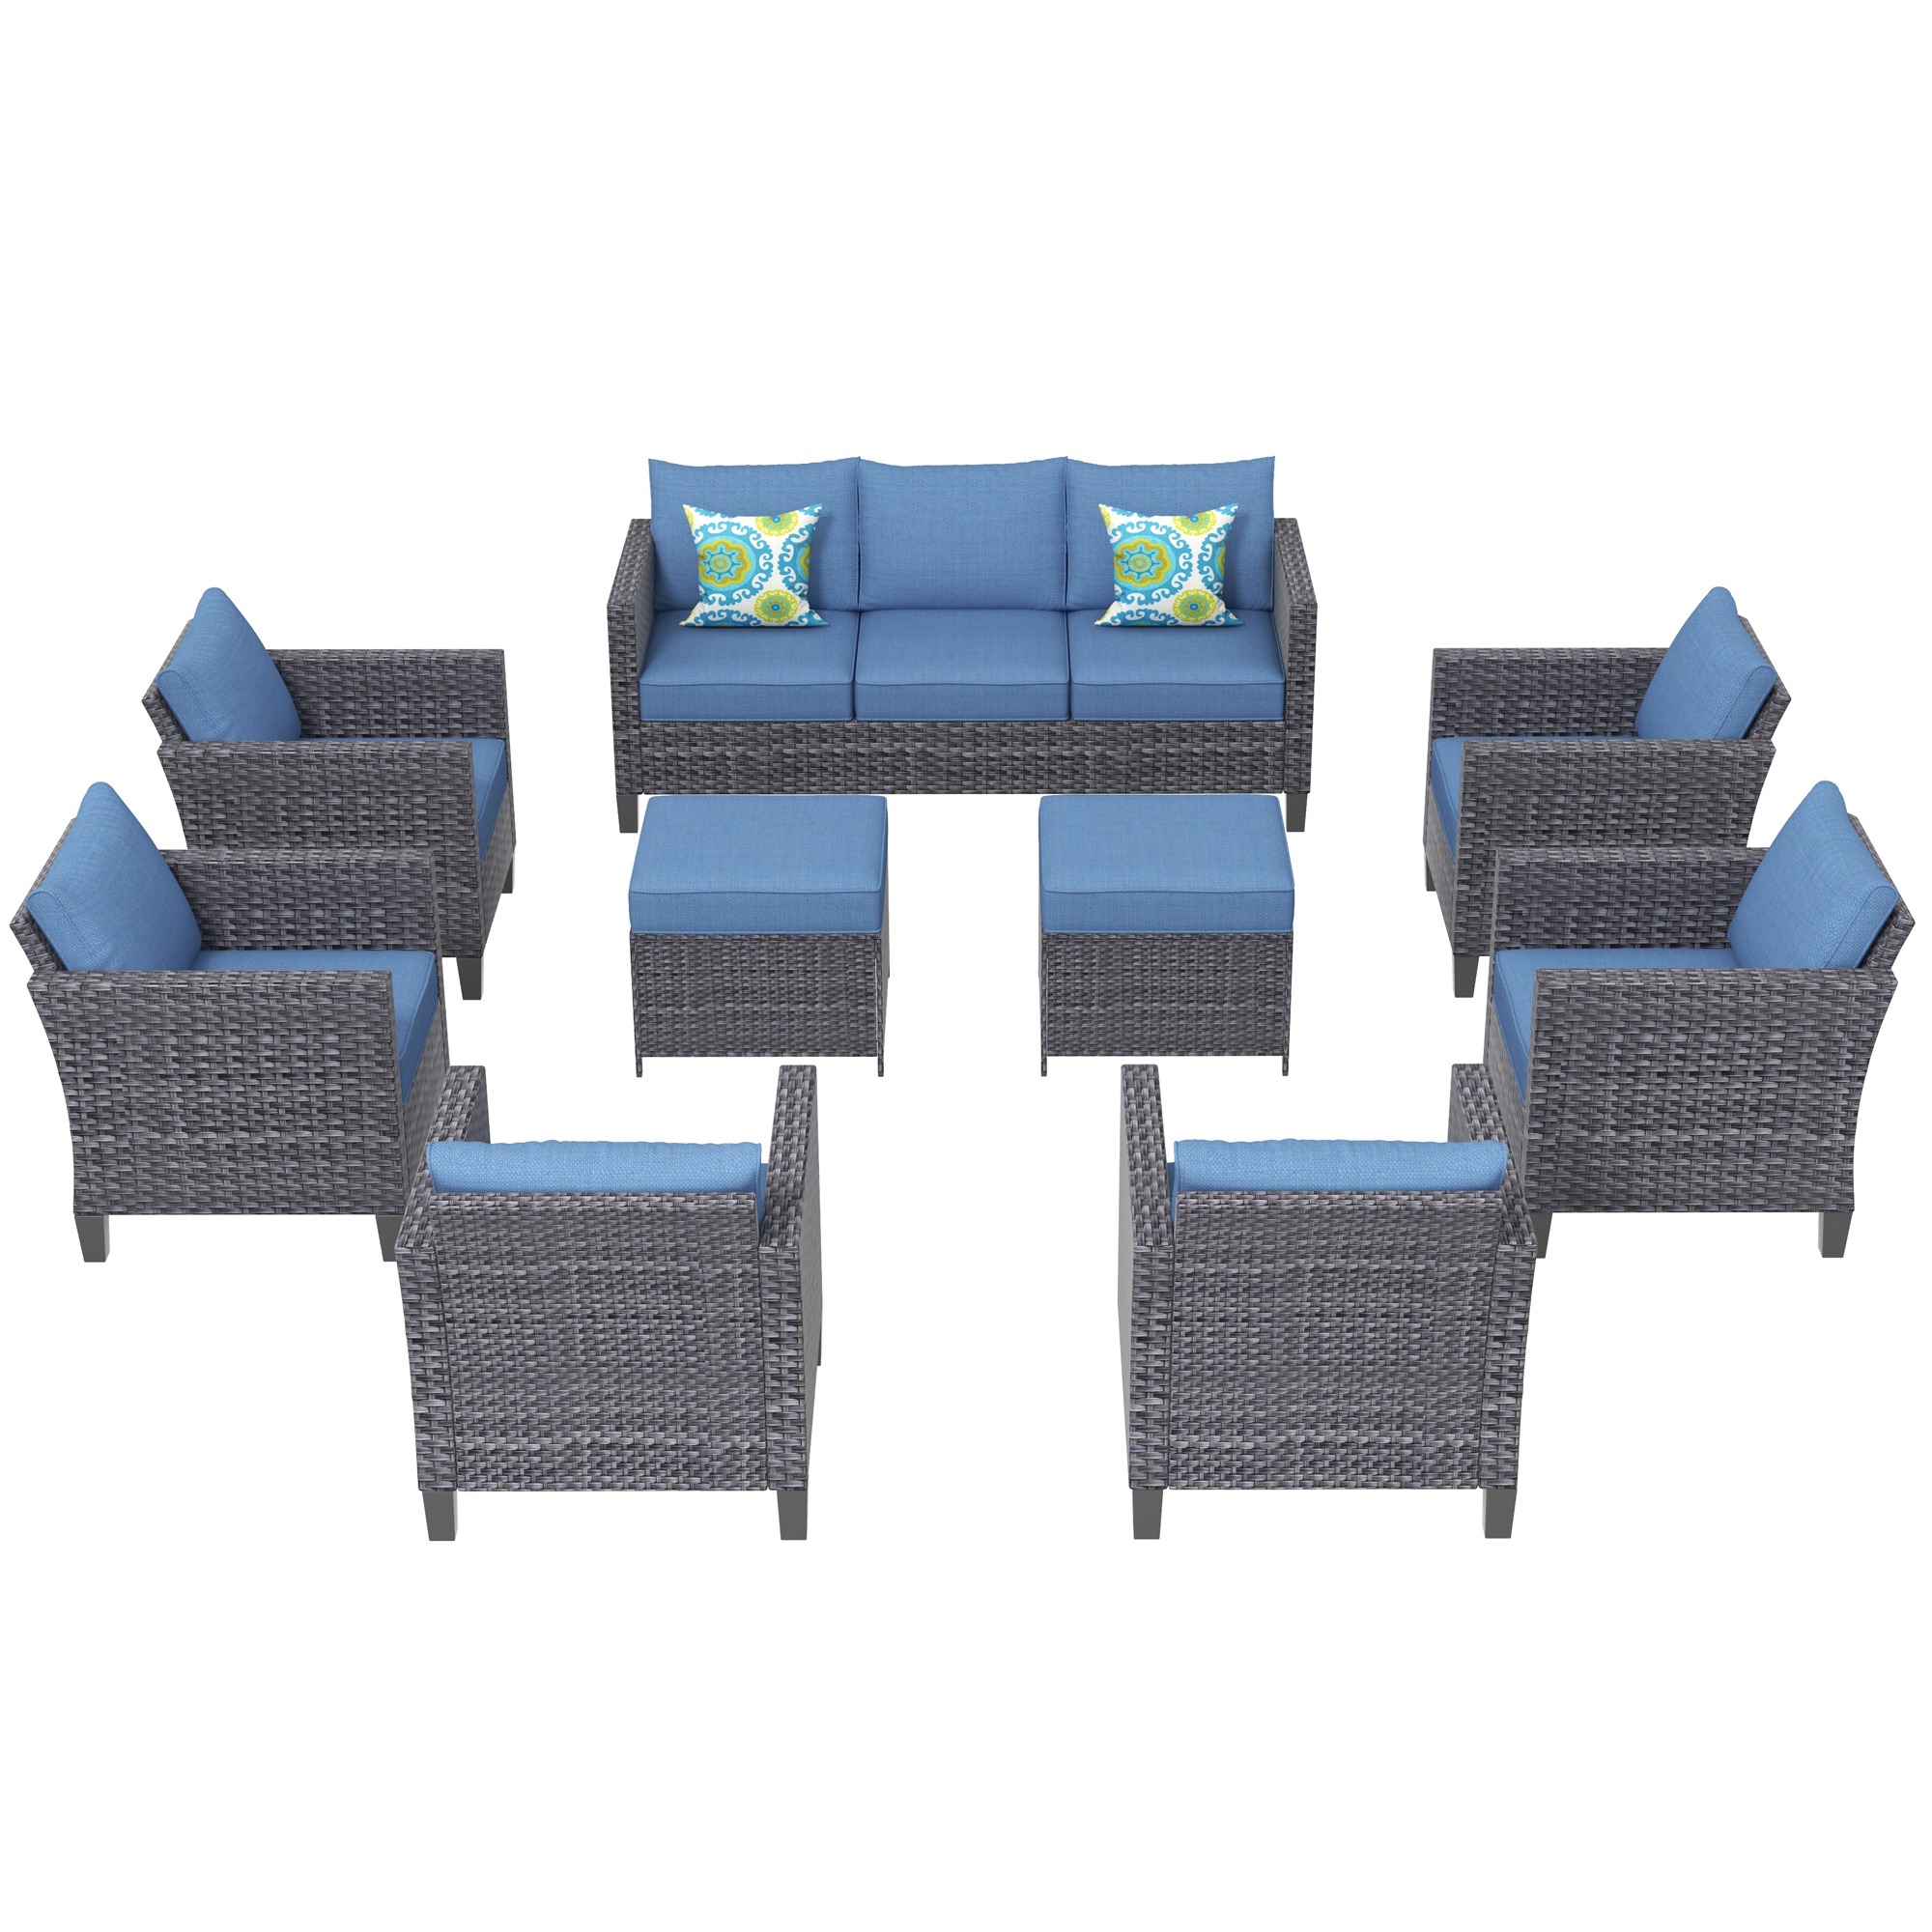 Ovios 9 Piece Outdoor Furniture All Weather Patio Conversation Chair Set Wicker Sectional Sofa with Soft Cushions for Garden Backyard (Denim Blue) - image 3 of 7